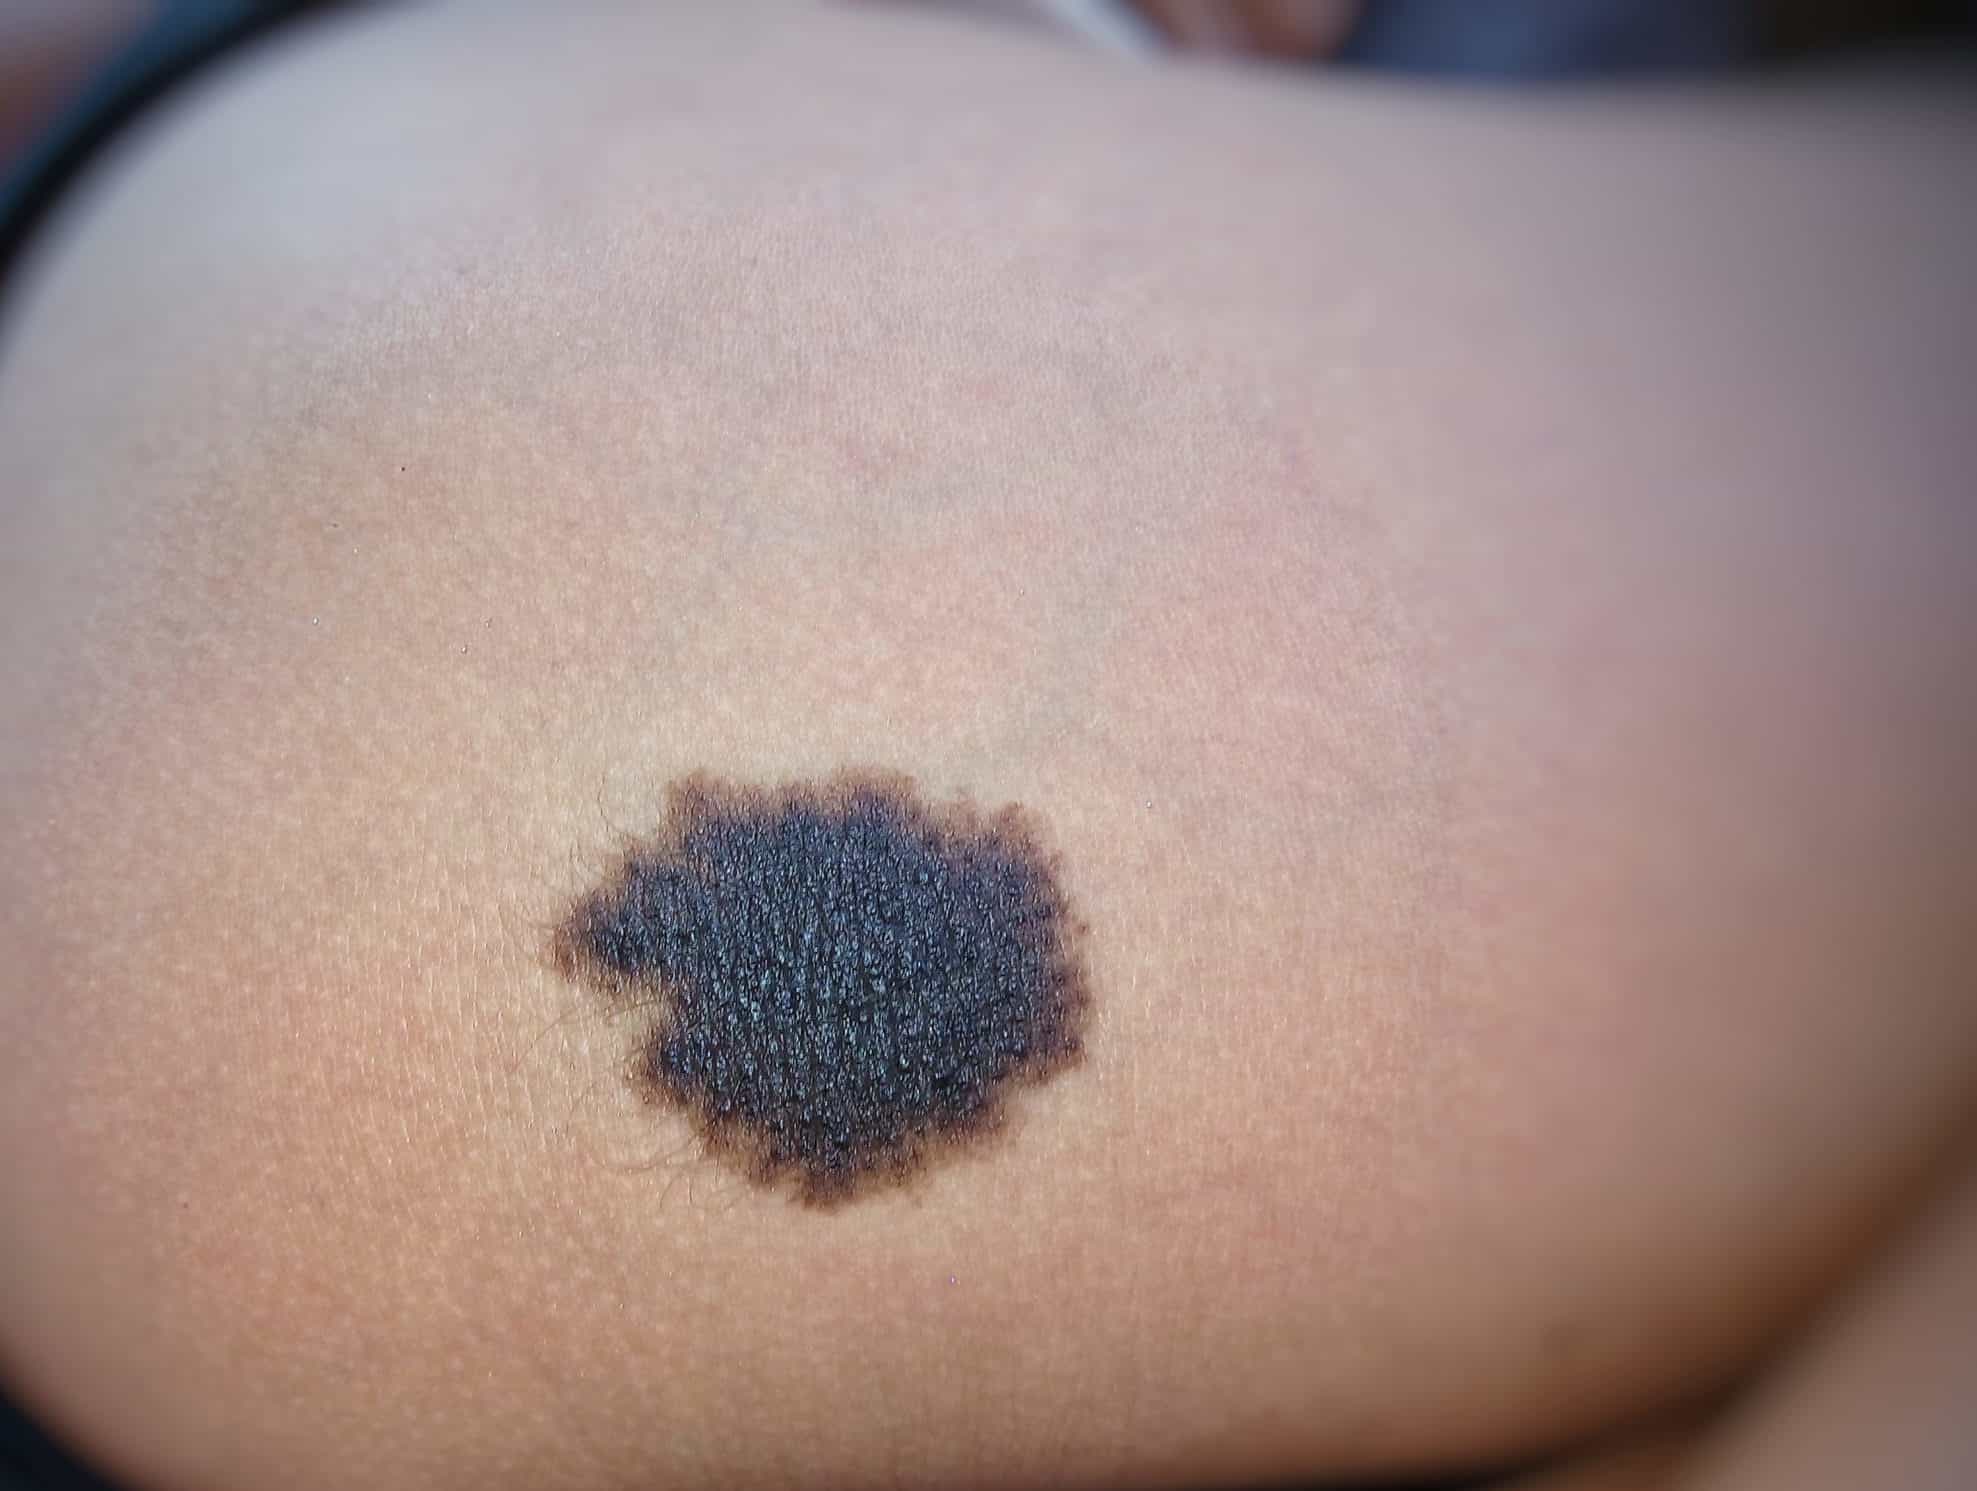 What does a breast cancer mole look like